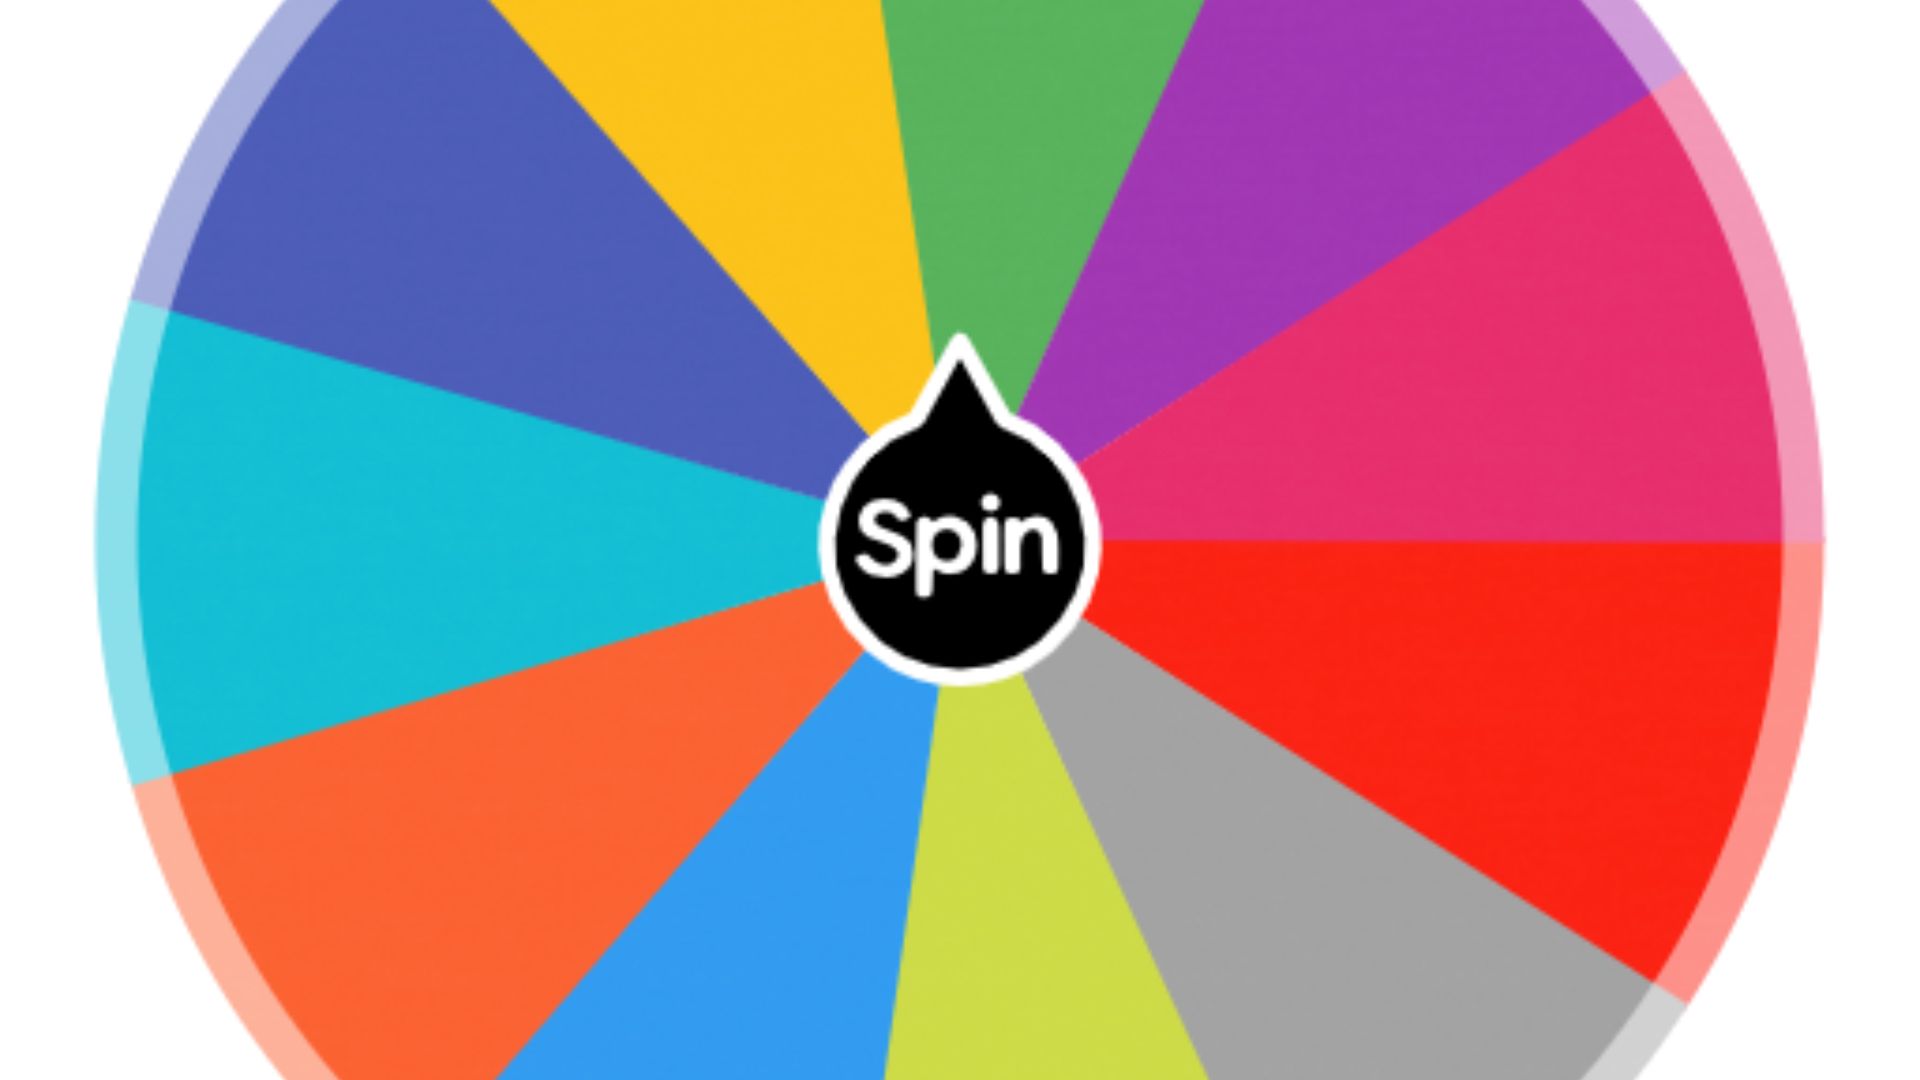 this image shows one of the Spin Wheel Designs